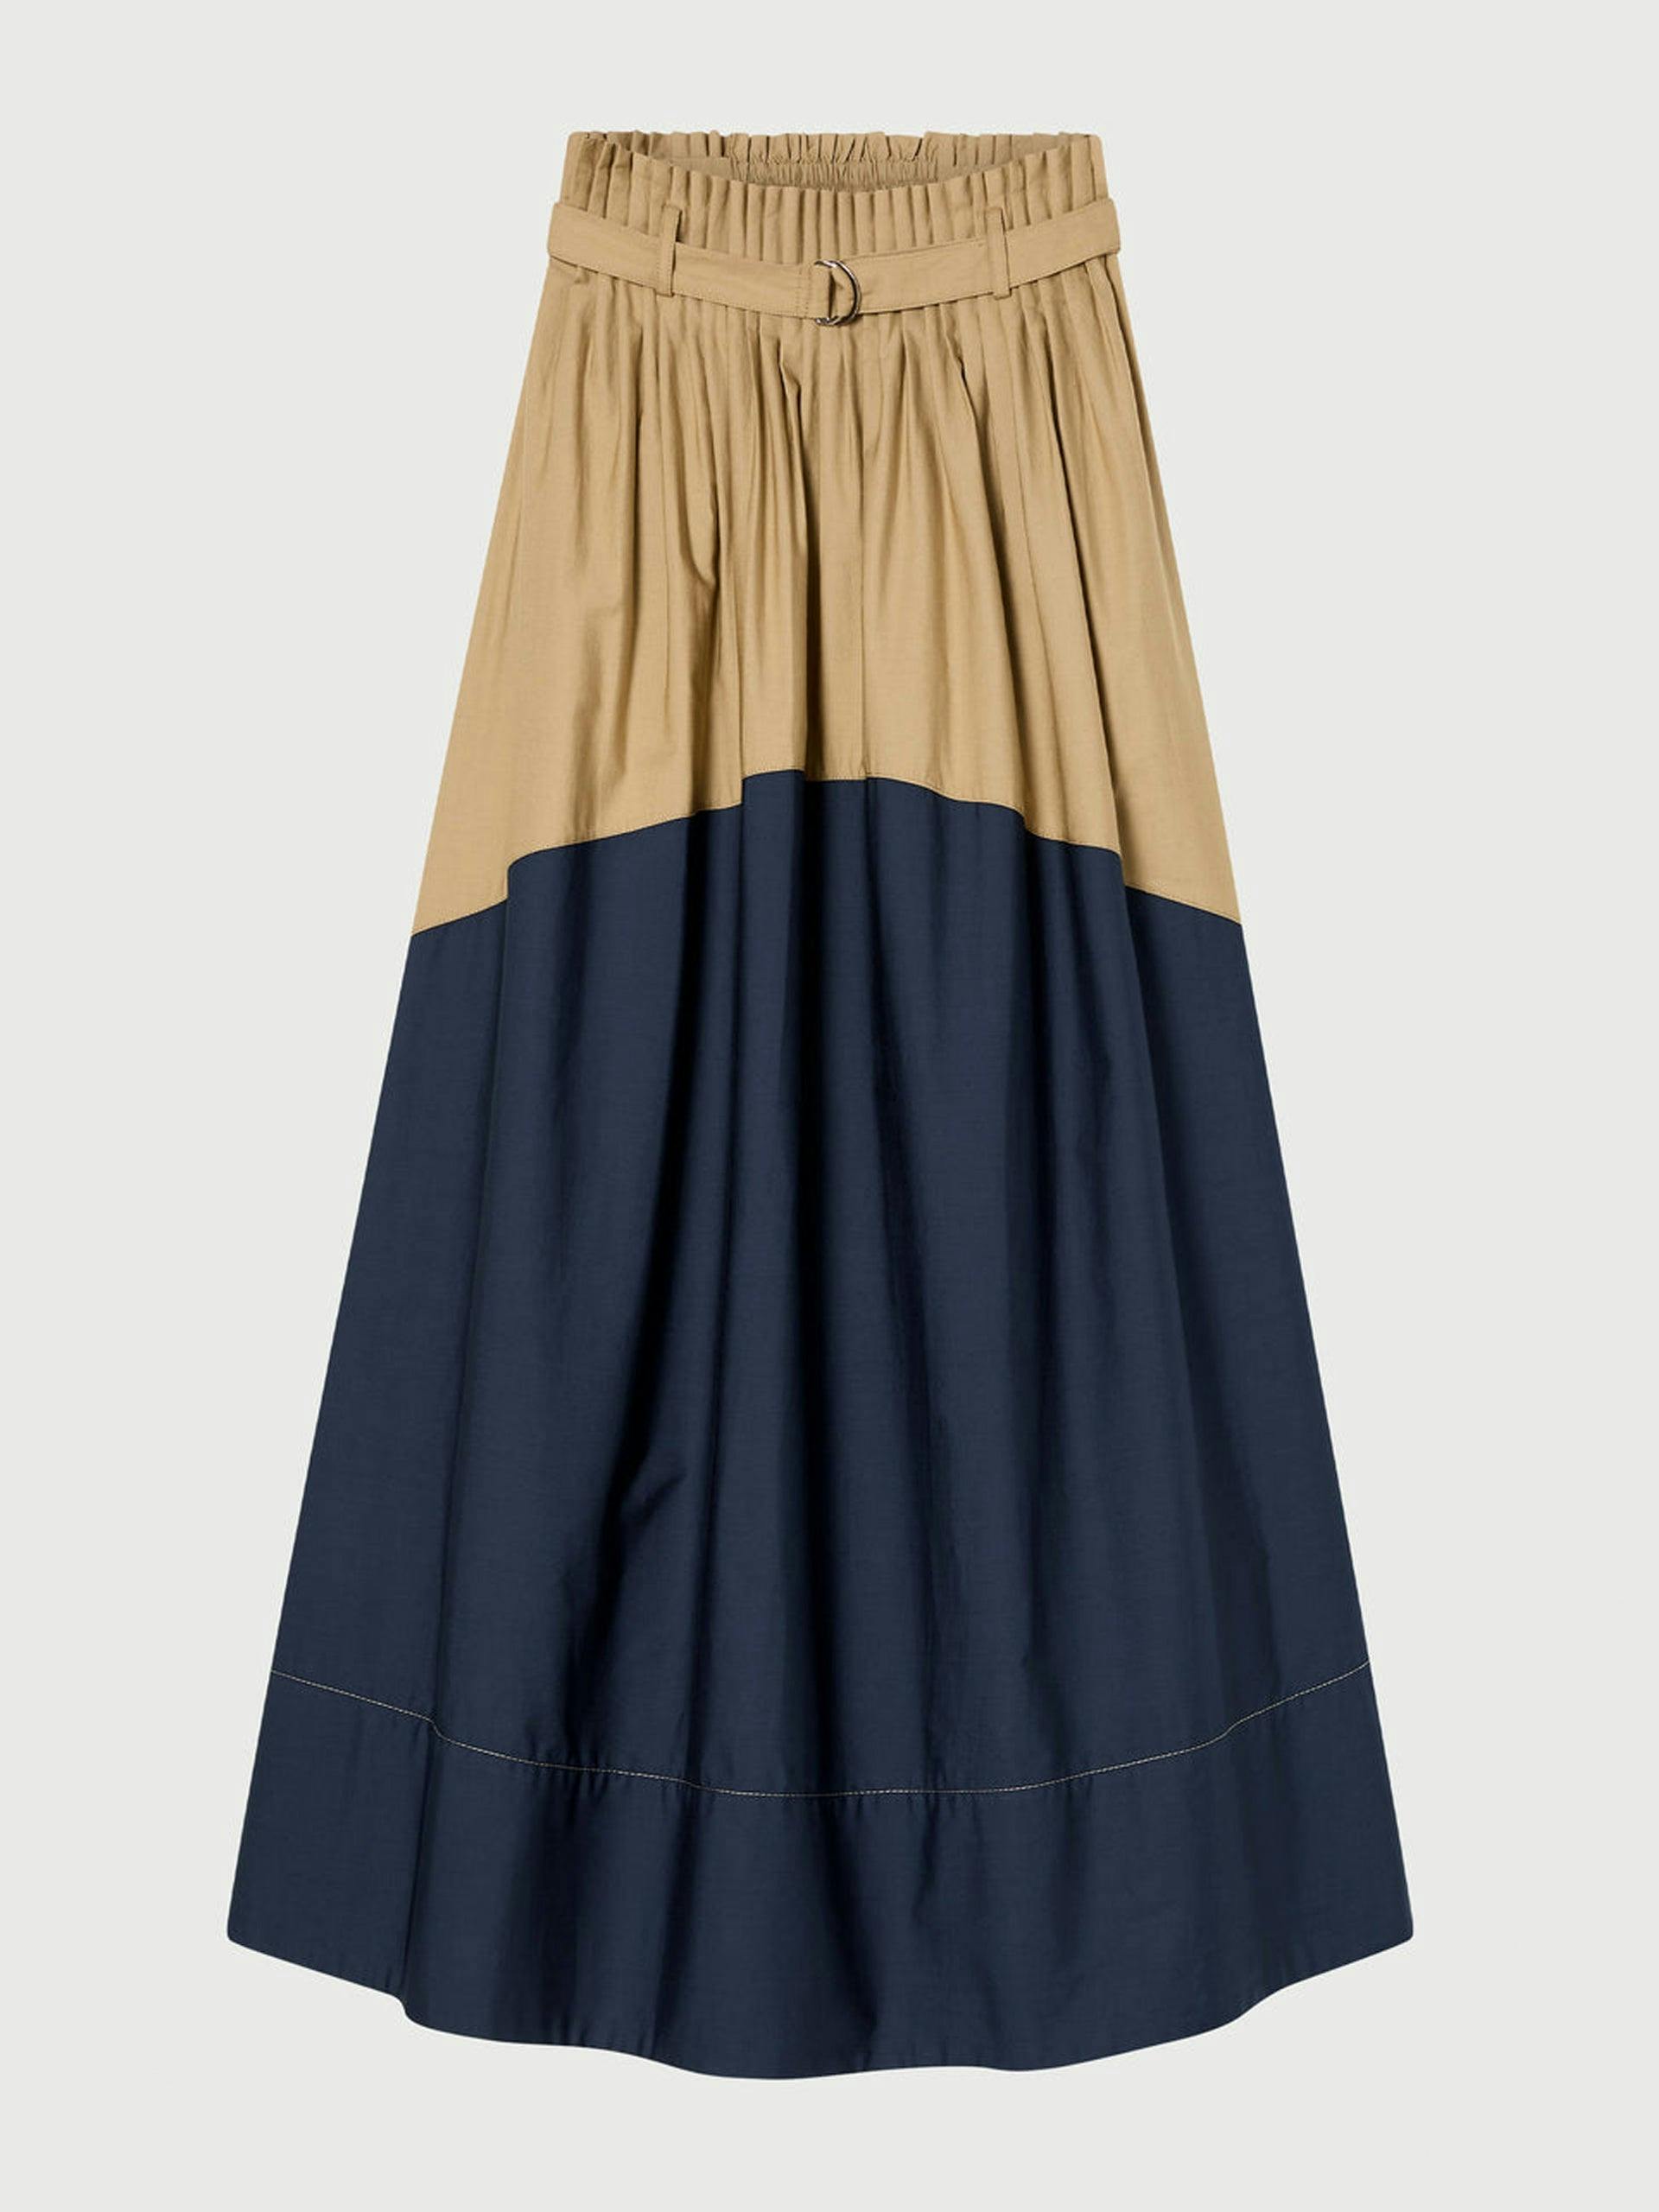 Beige and navy maxi skirt